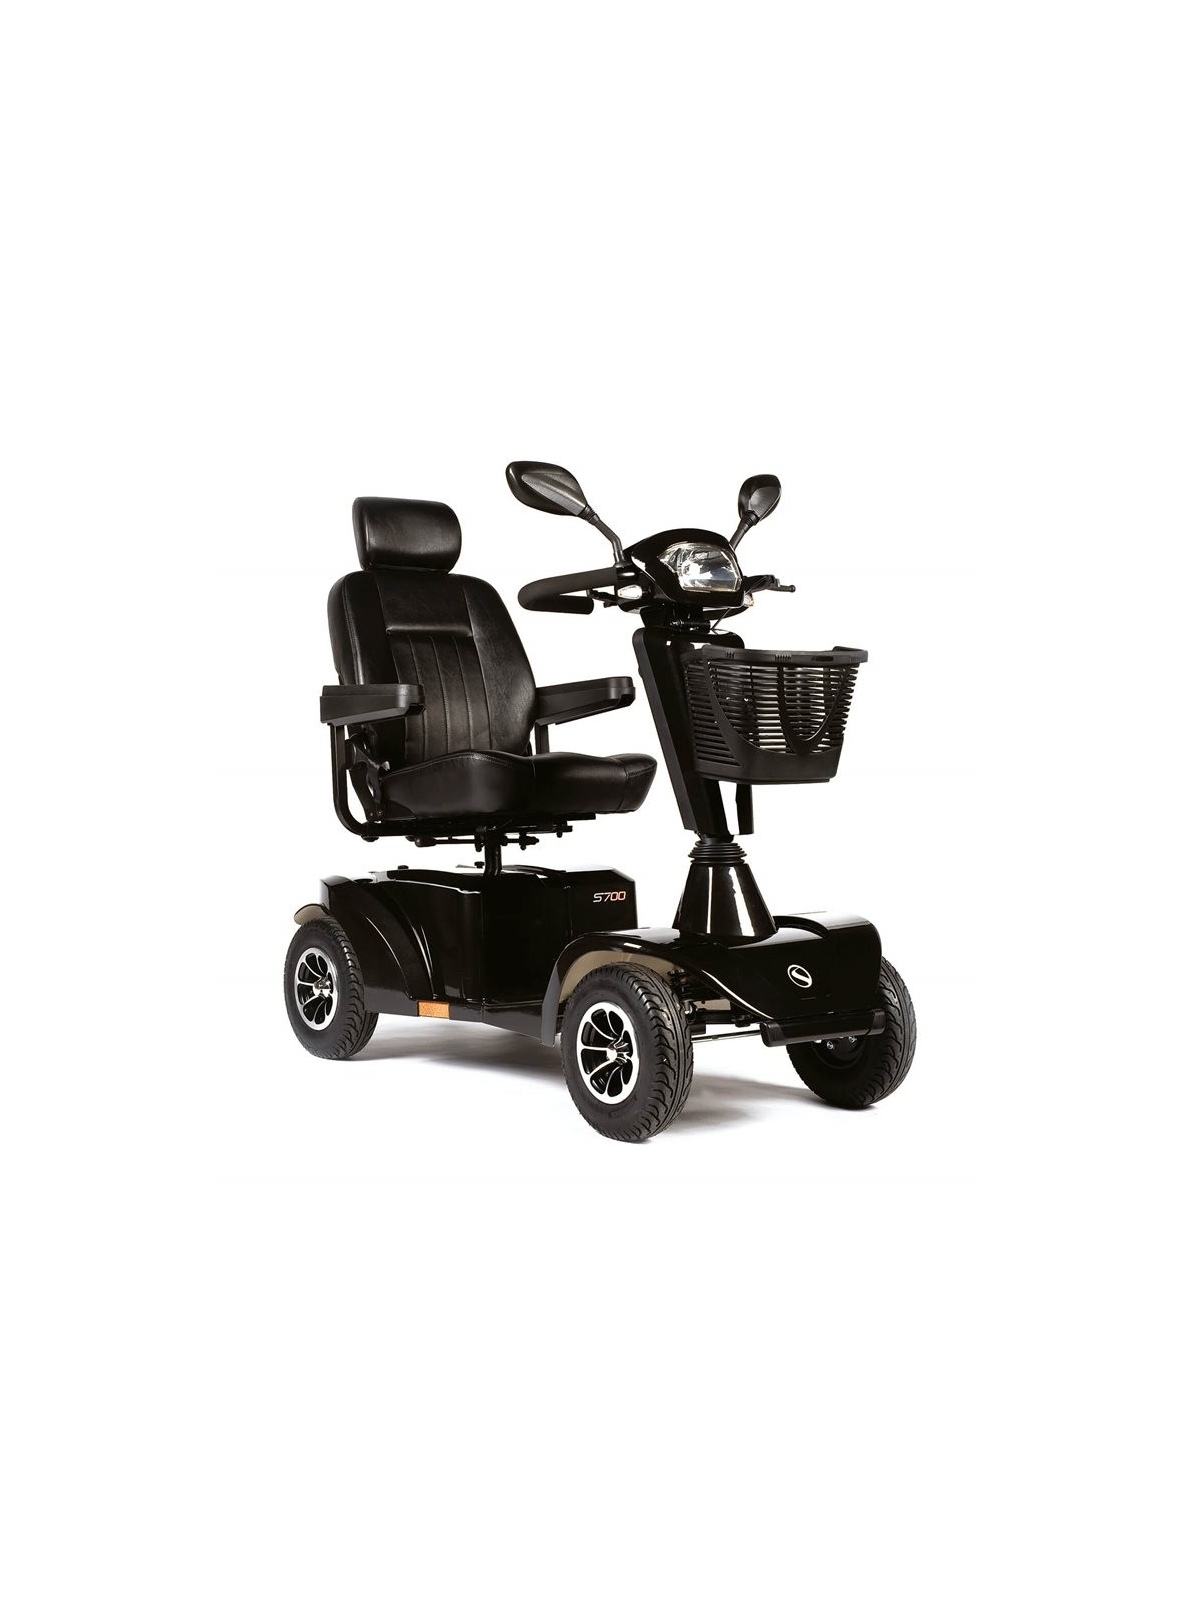 Scooter eléctrico Sterling S700